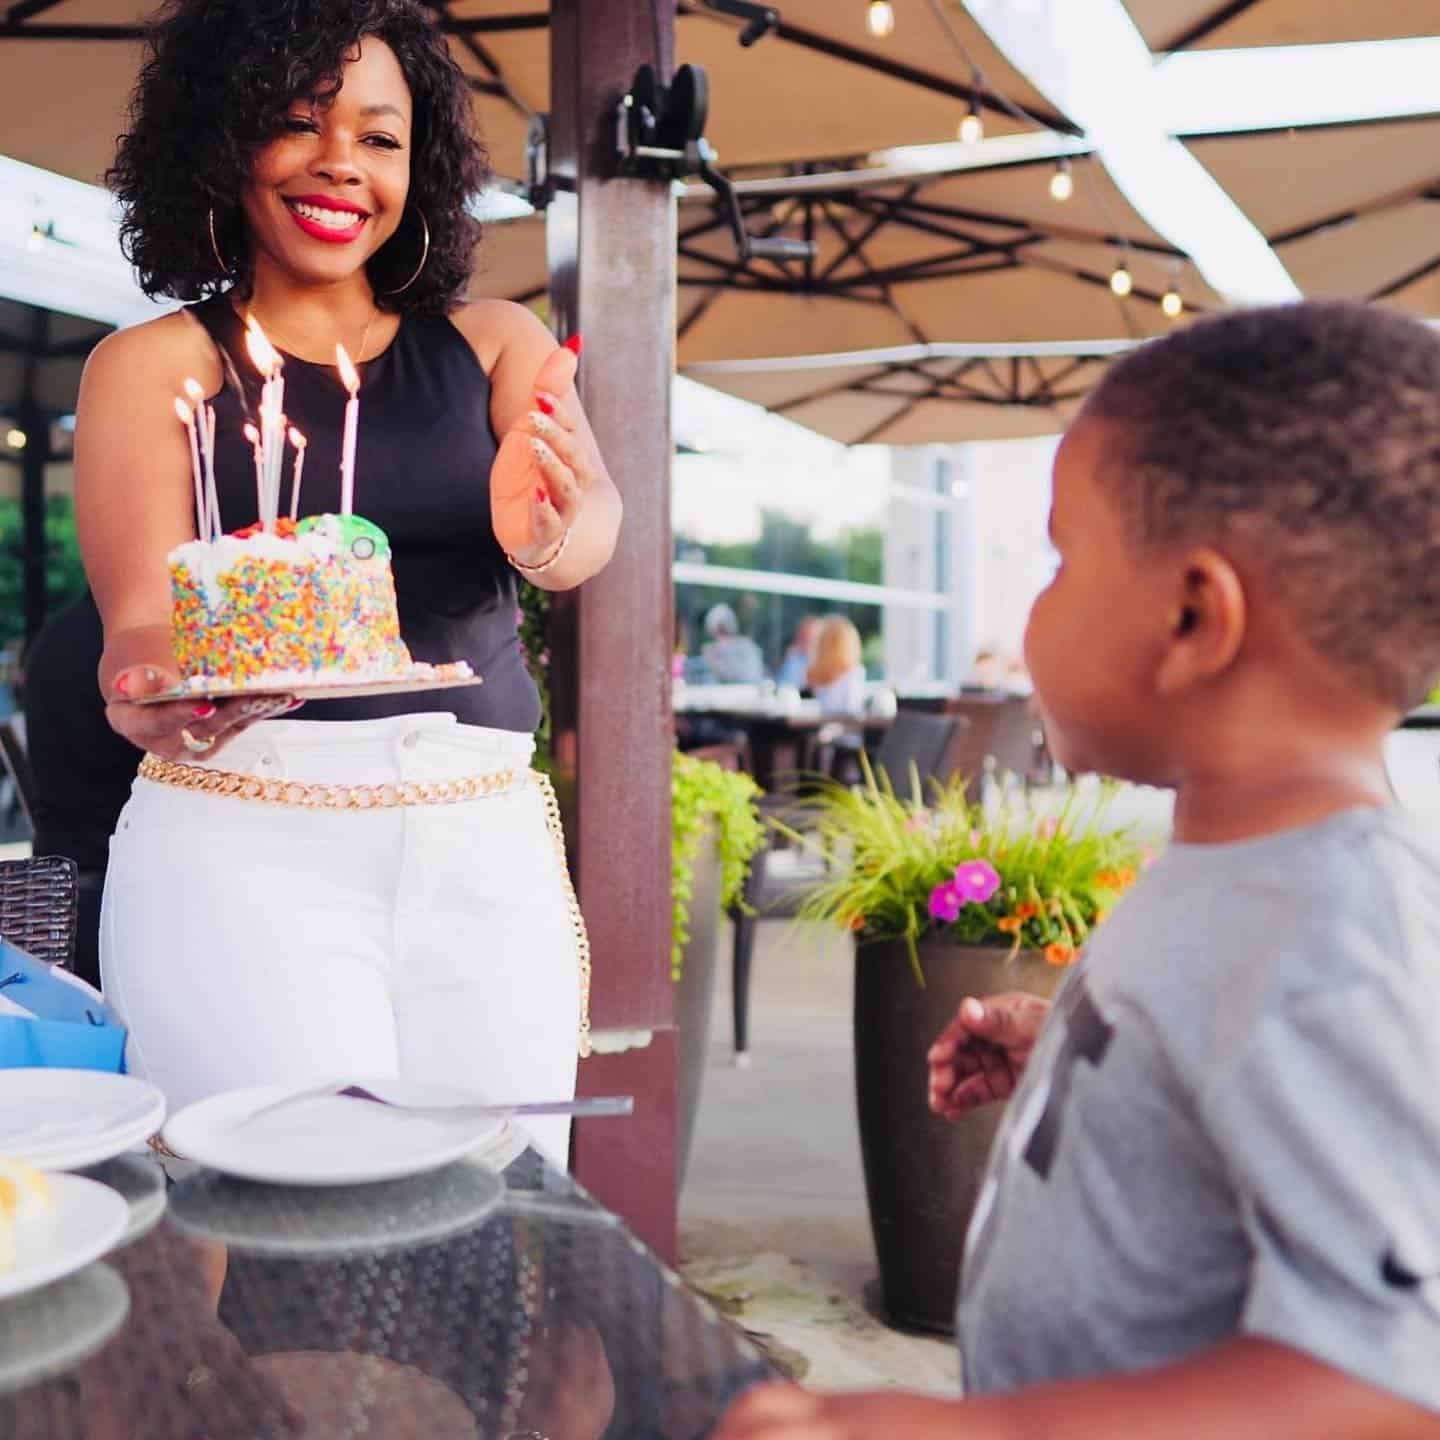 Happy September! 

DID YOU KNOW?! September is one of the most common birthday months! We want to be a part of all the celebratory, birthday festivities this month (and every month). 

BIRTHDAY IDEAS AT METROPOLITAN: 
🧁 Browse Best Buy for the perfect birthday gift. 
🧁 Reserve a table at Dressler’s, Pizzeria Omaggio or Pisces for a memorable birthday dinner. 
🧁 Swing by Marshalls for a special birthday outfit.
🧁 Rent a private event space at Midtown Ballroom. 
🧁 Stop by Trader Joe’s for cake, cupcakes and all the birthday treats.